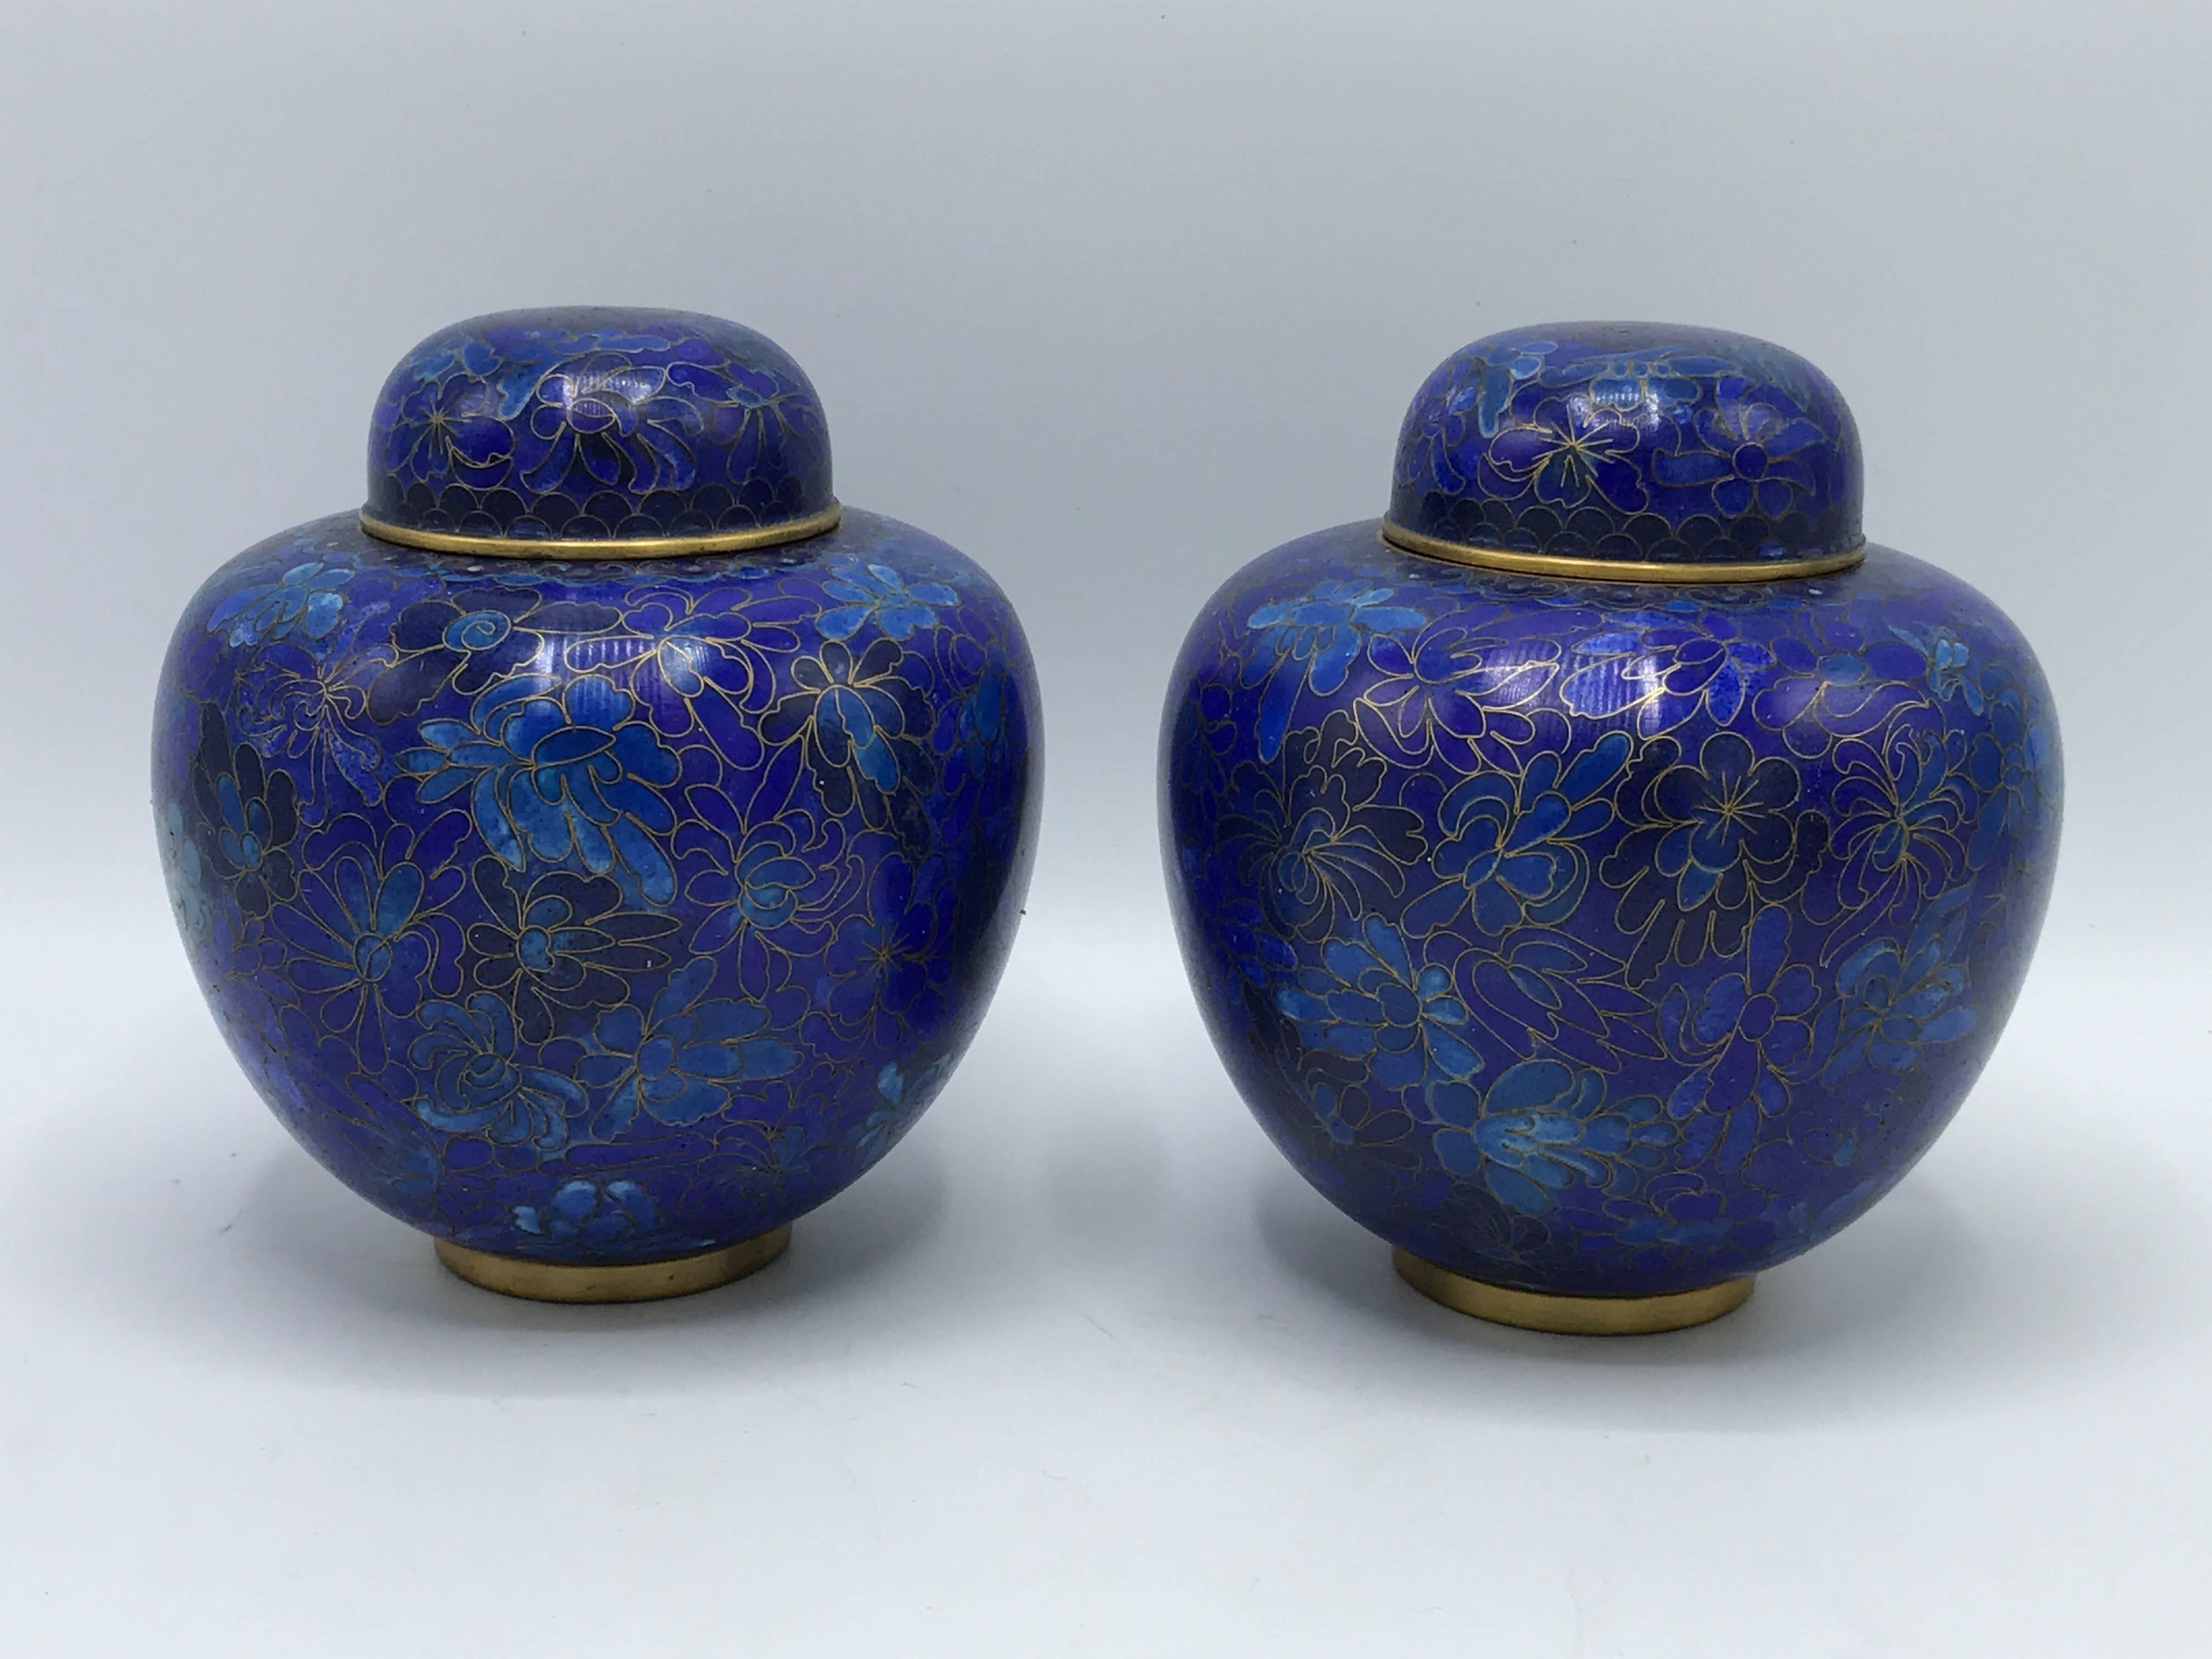 Offered is a stunning pair of 1960s cloisonńe ginger jars. Cobalt blue with a floral motif.